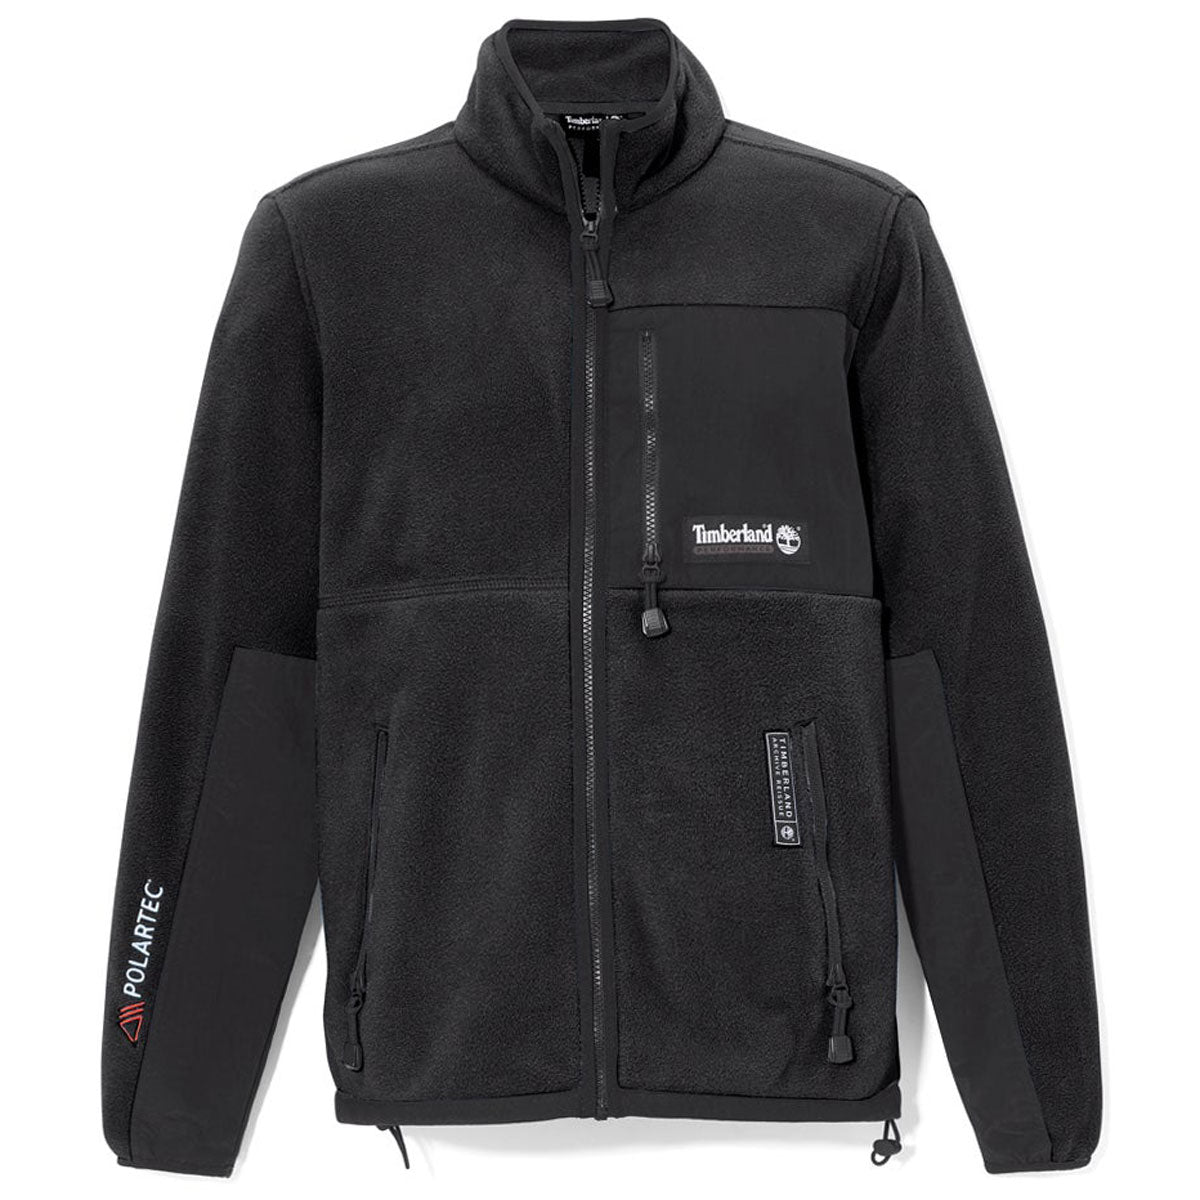 Timberland Outdoor Archive Re-issue Jacket - Black image 2